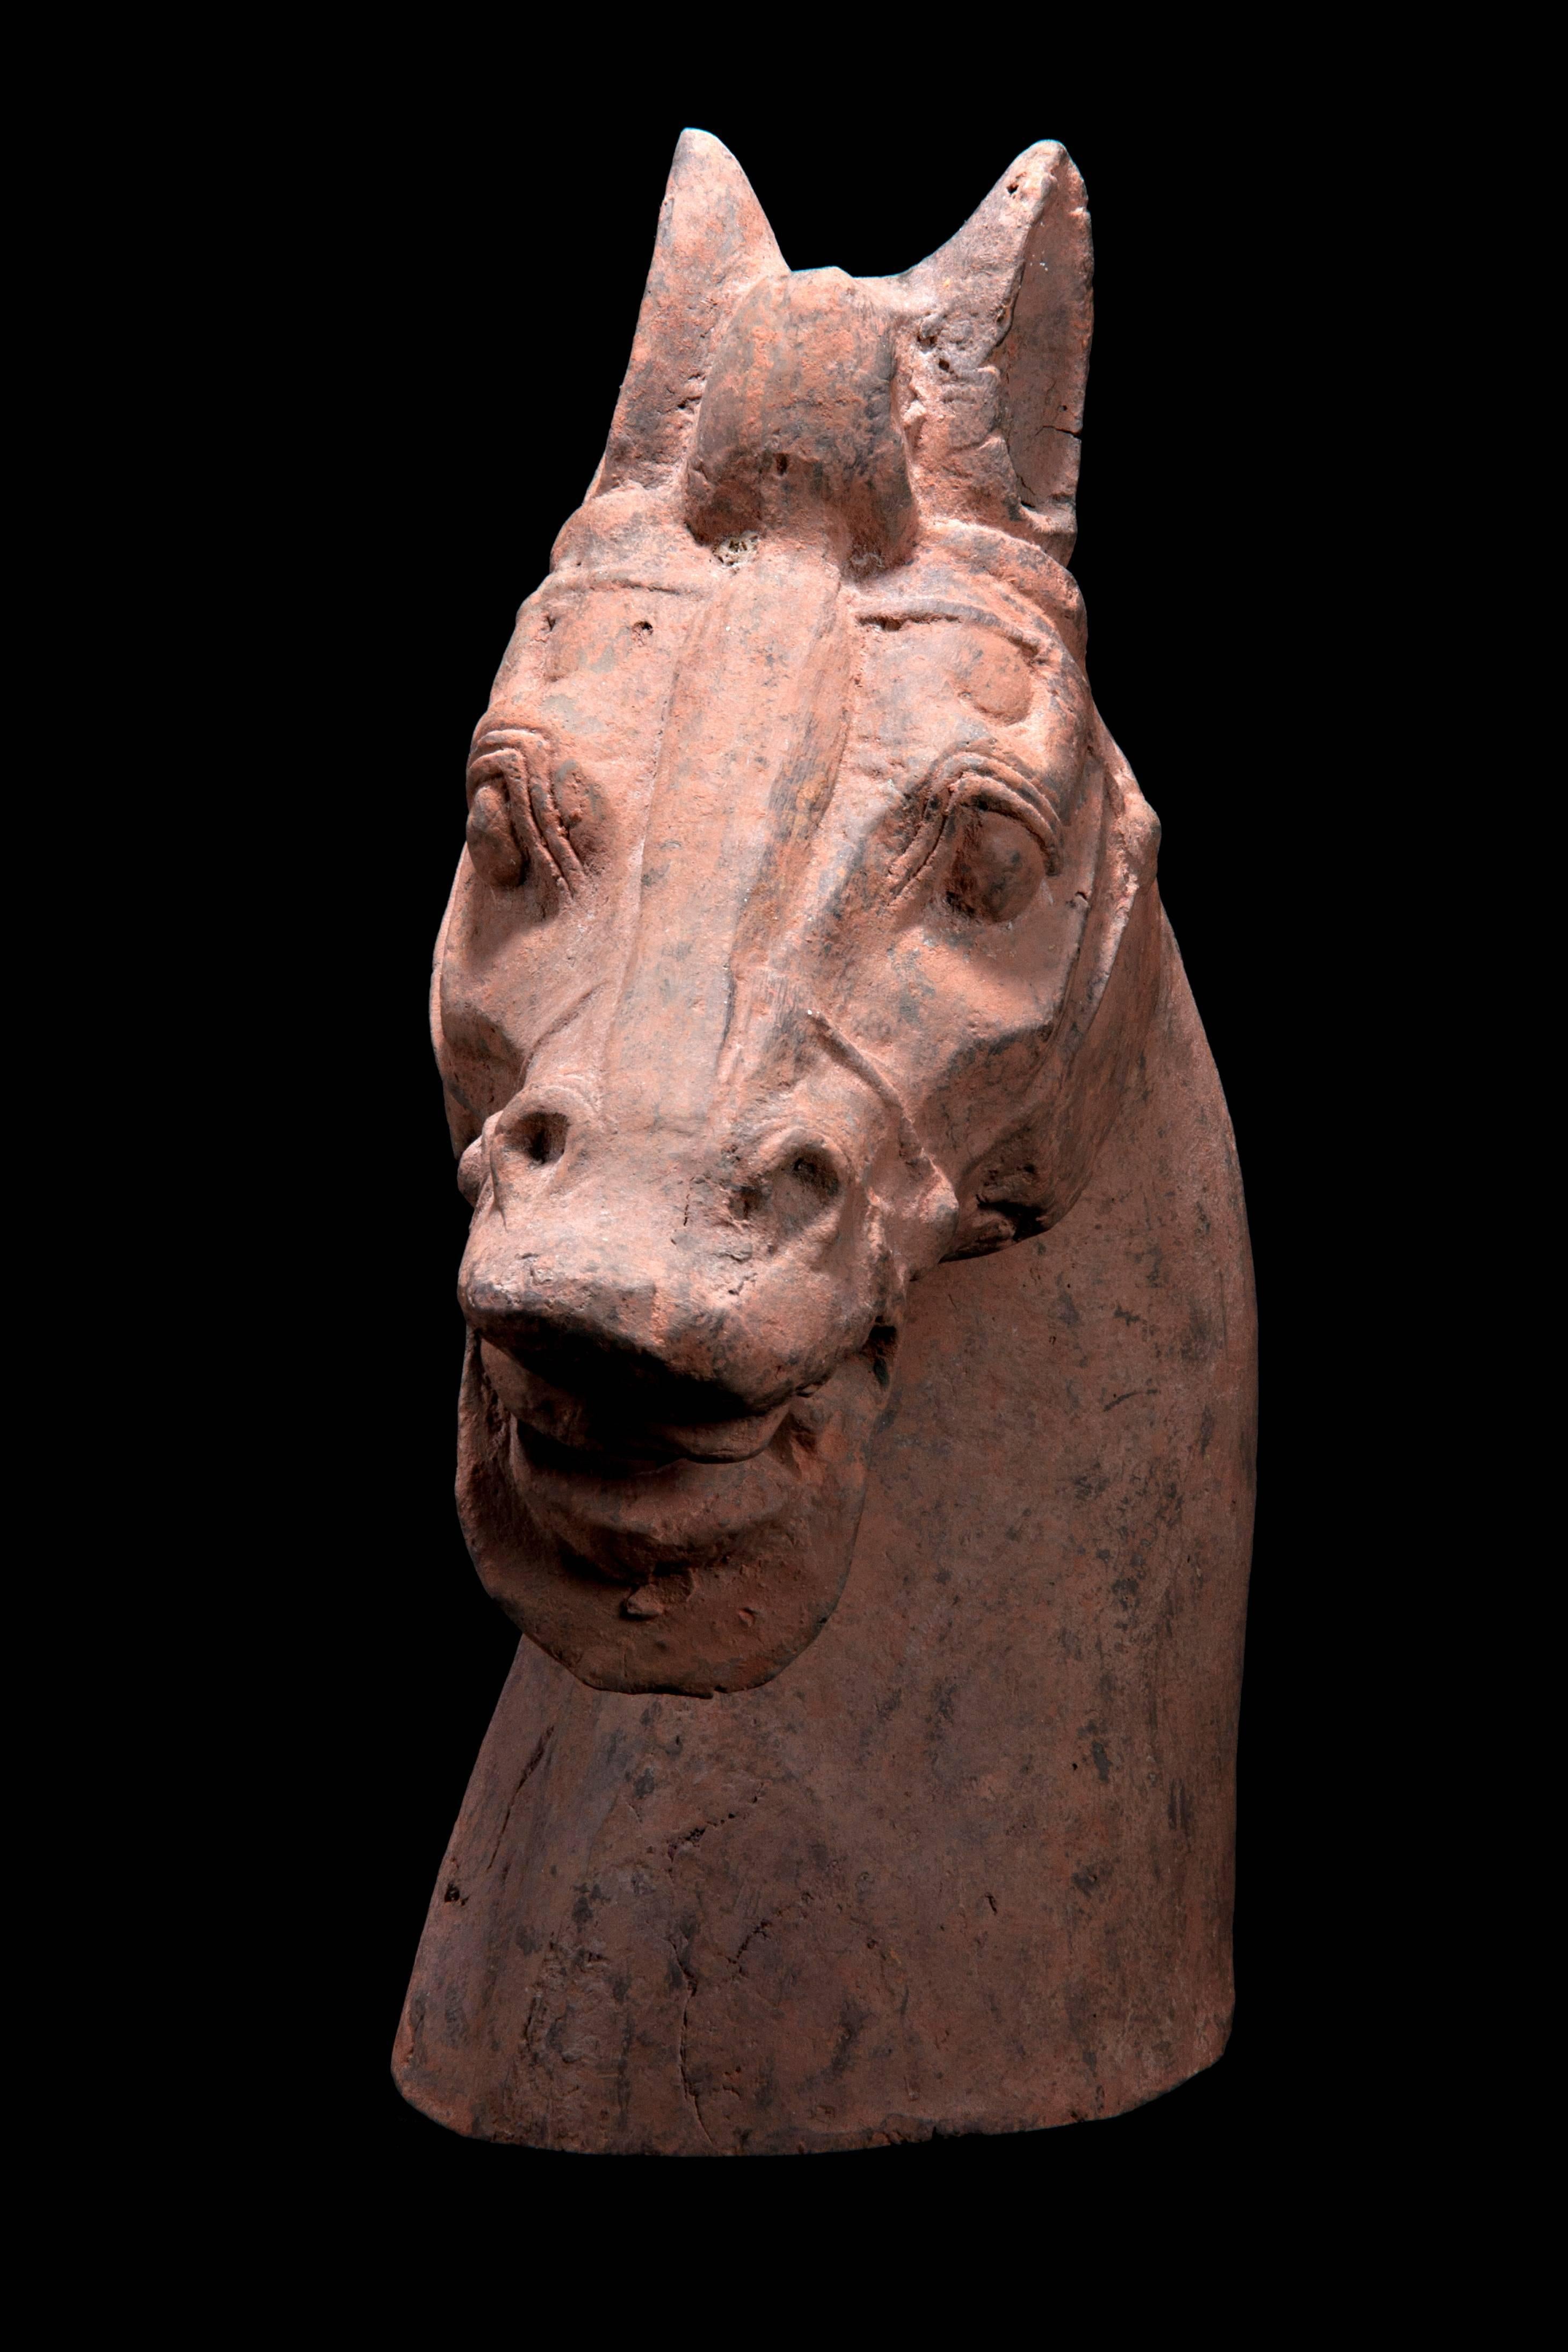 A massive pottery horse with separately made head and tail, standing on all fours and striding with its right hoof forward. Extended snout ends in parted lips showing teeth beneath in a braying attitude. Low relief bridle on face and well defined